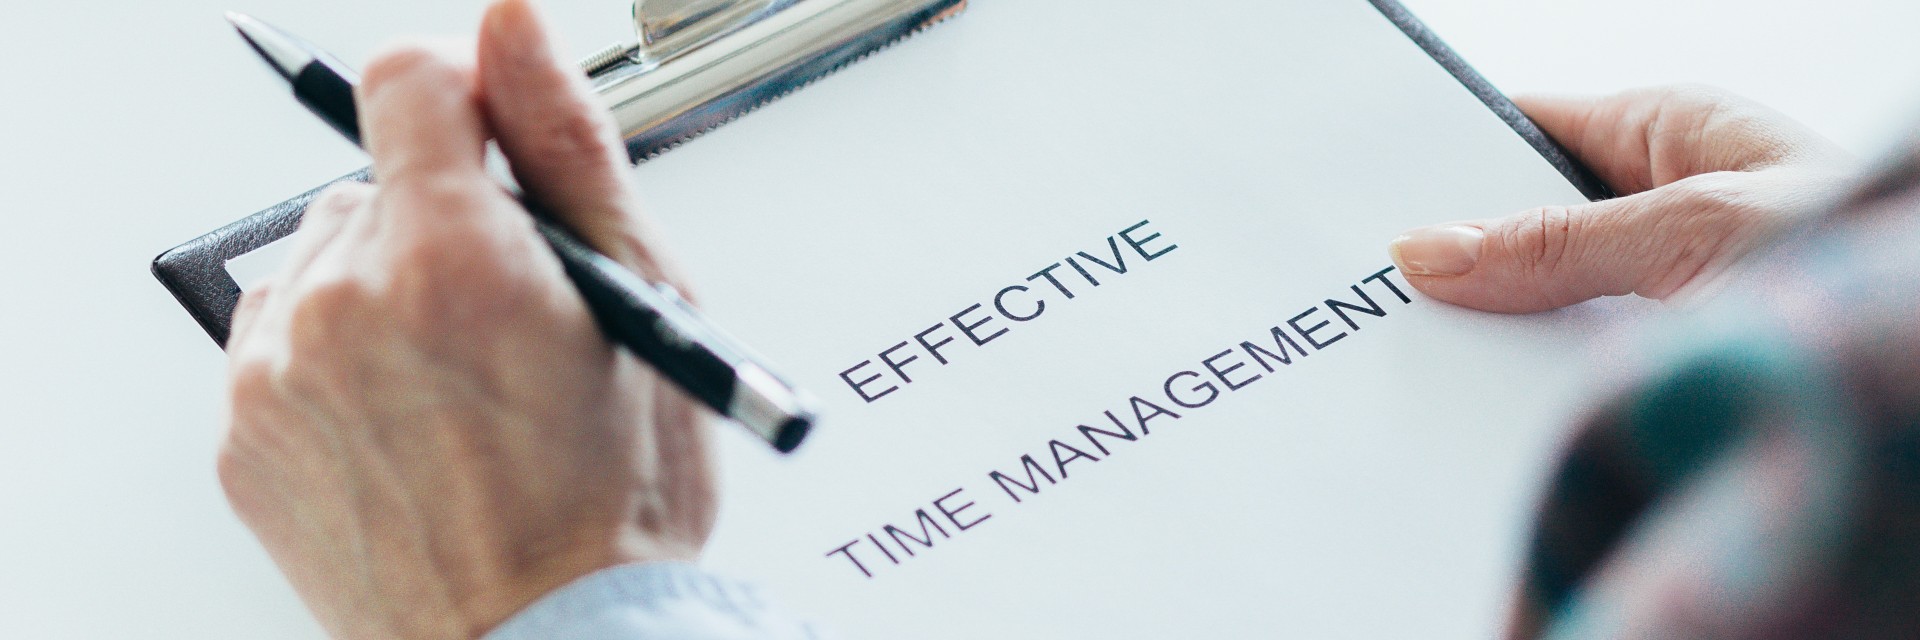 9 Time Management Tips To Learn Effectively